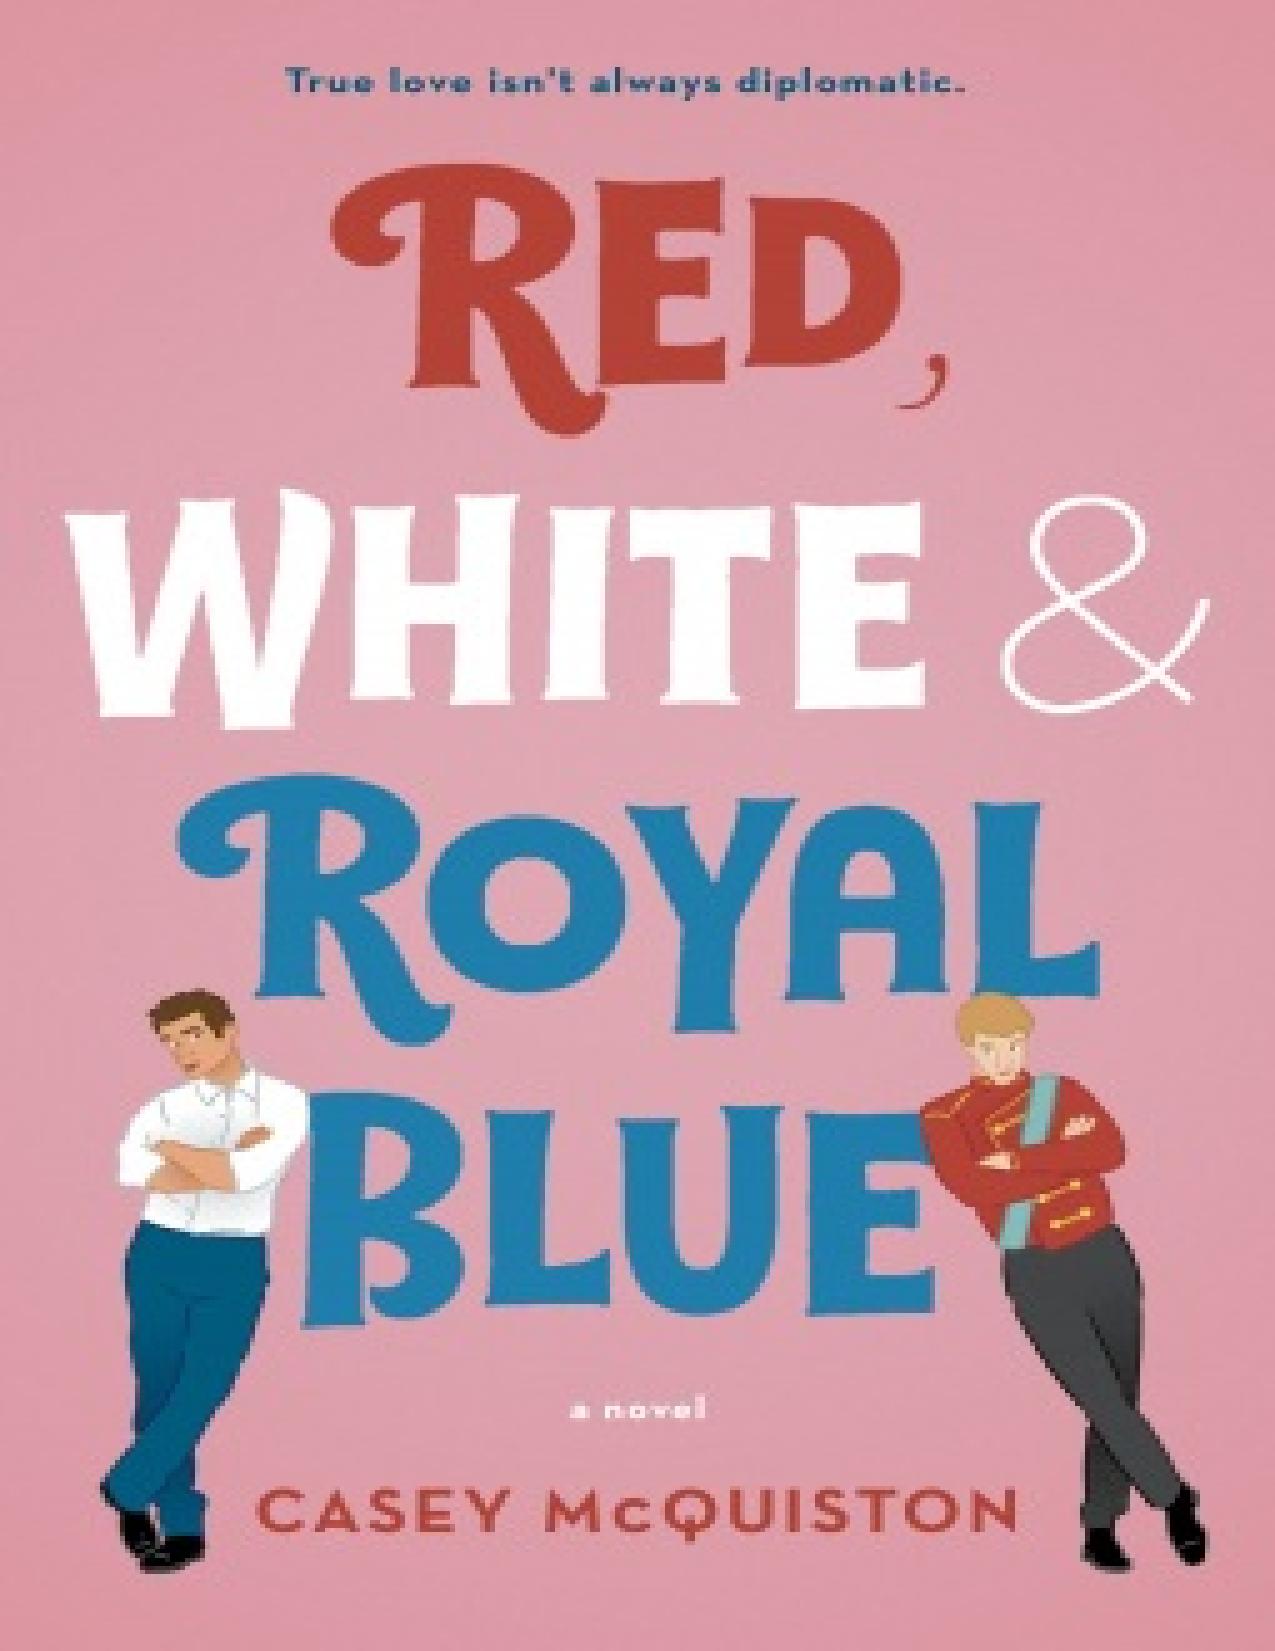 Red, white and royal blue by Casey McQuiston by Zamzar